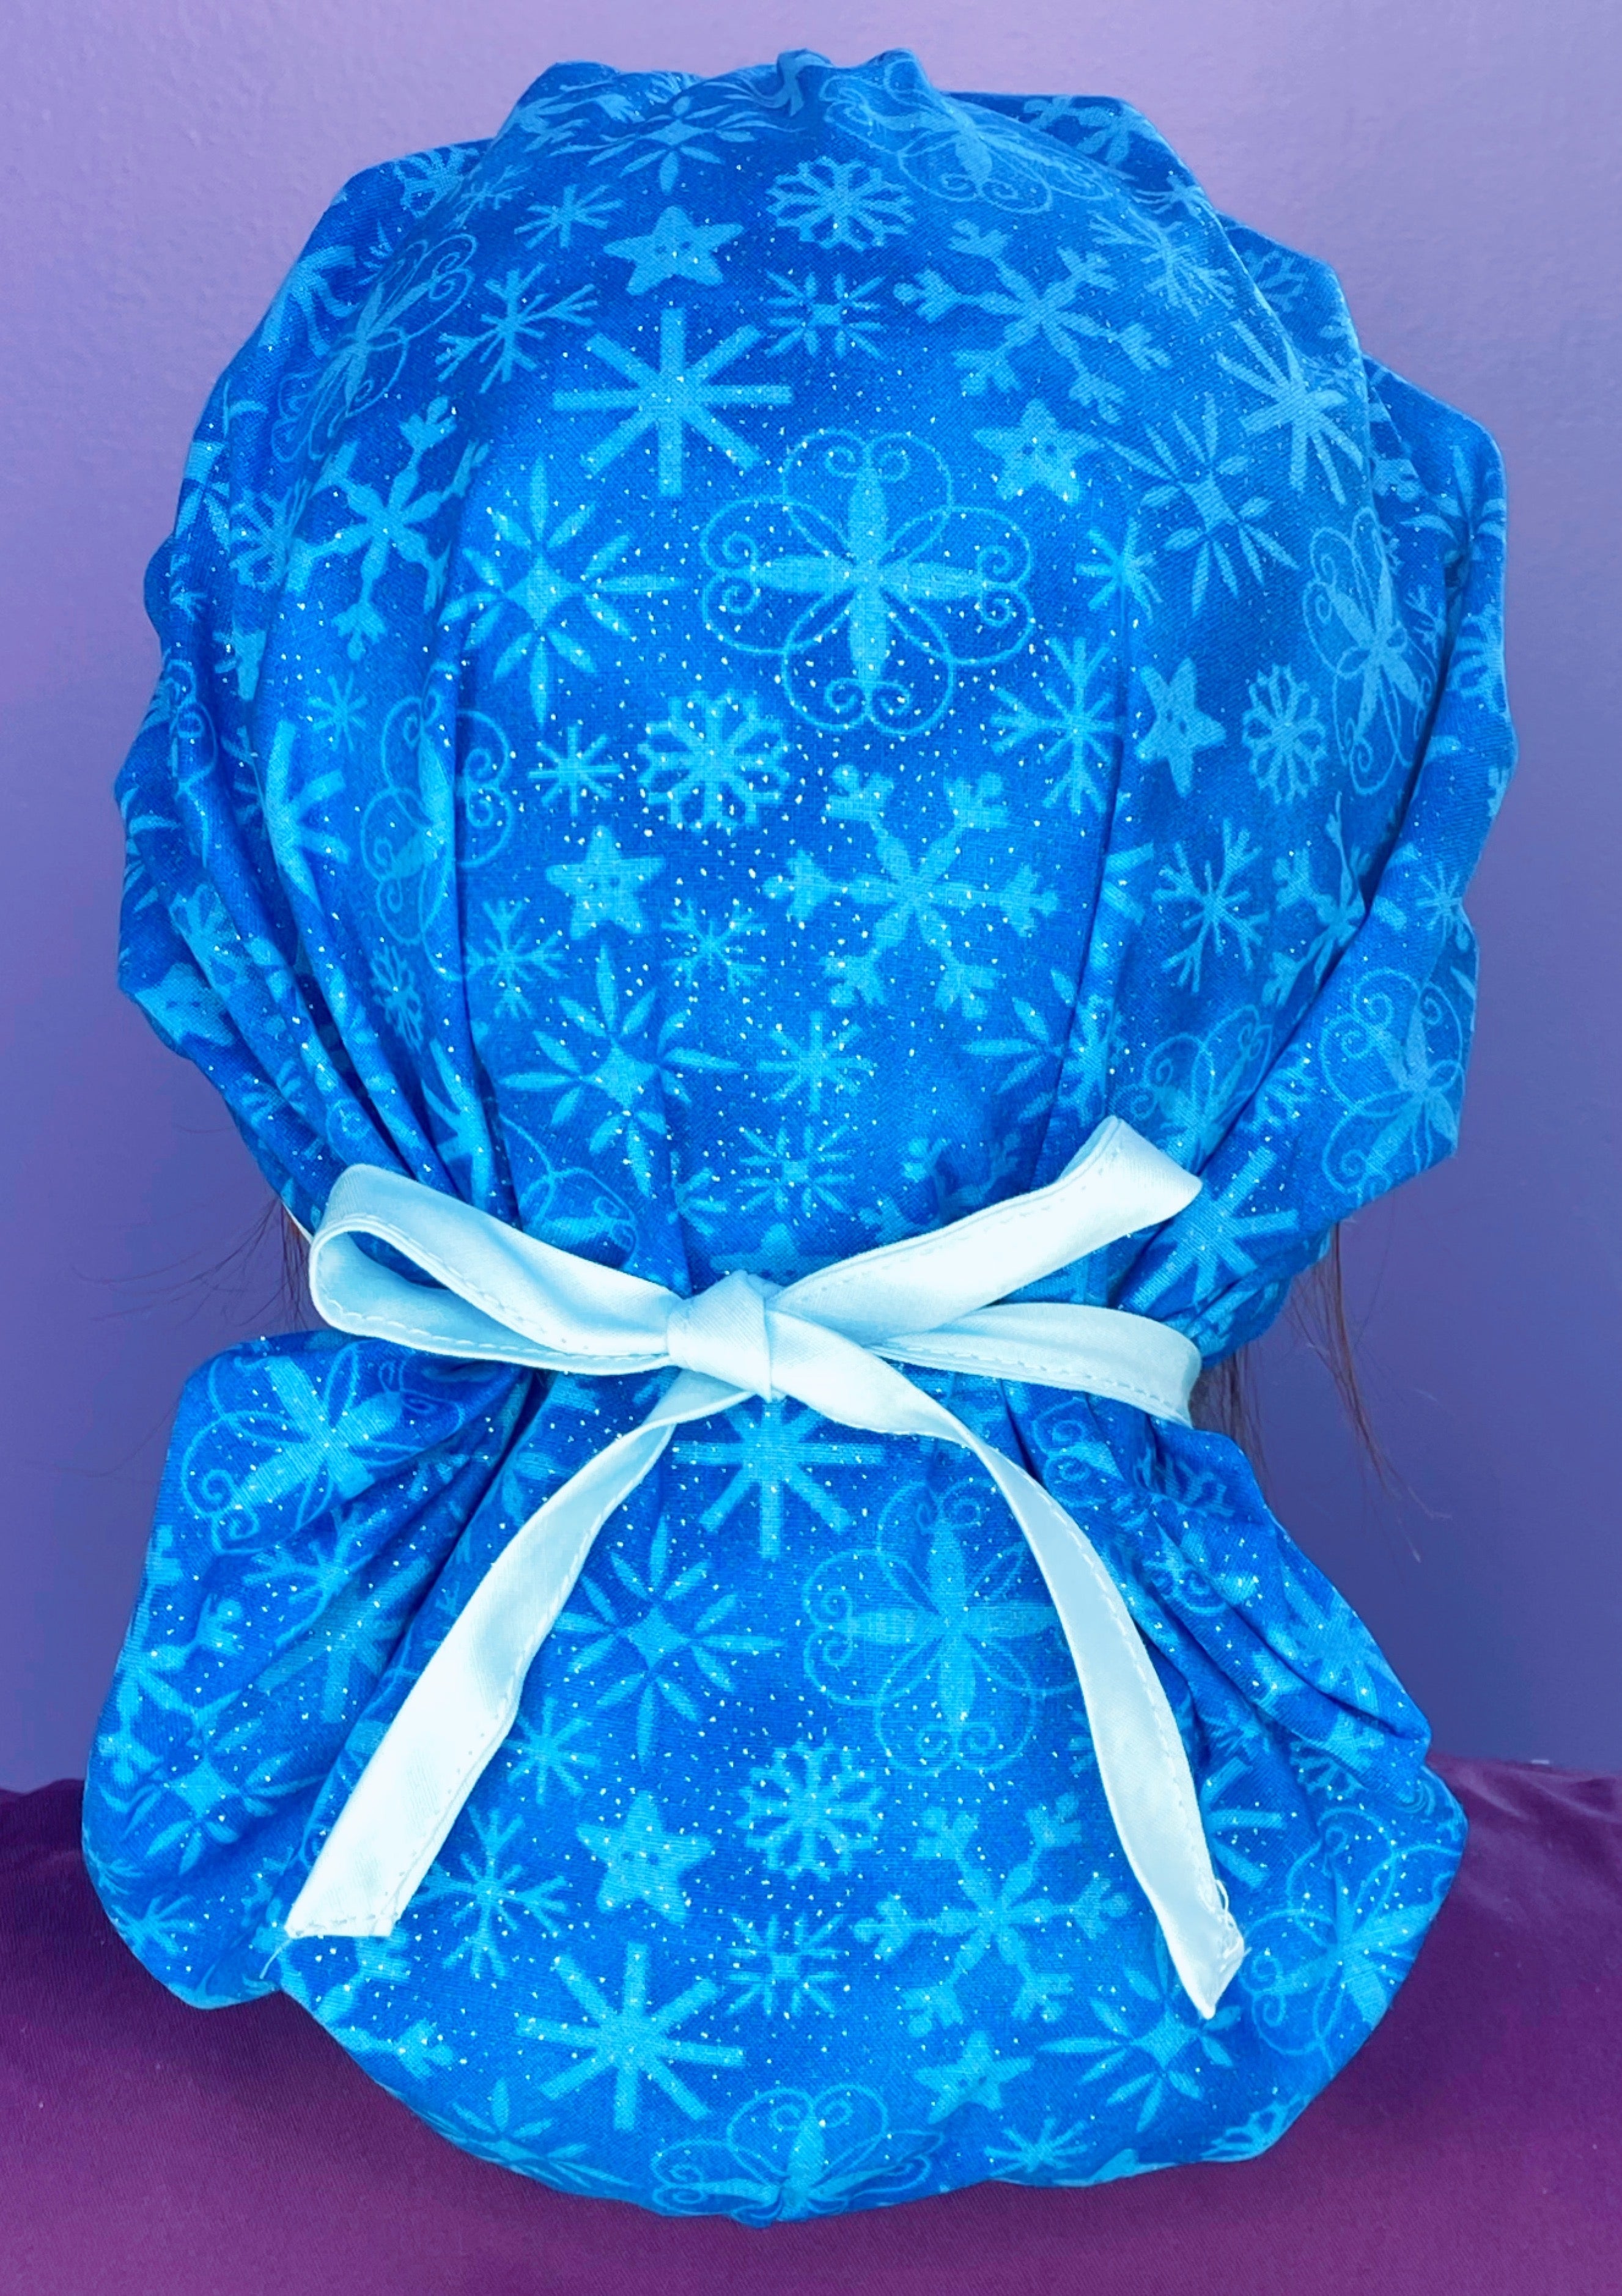 Snowflakes on Turquoise Glitter Winter/Christmas Holiday Themed Bouffant